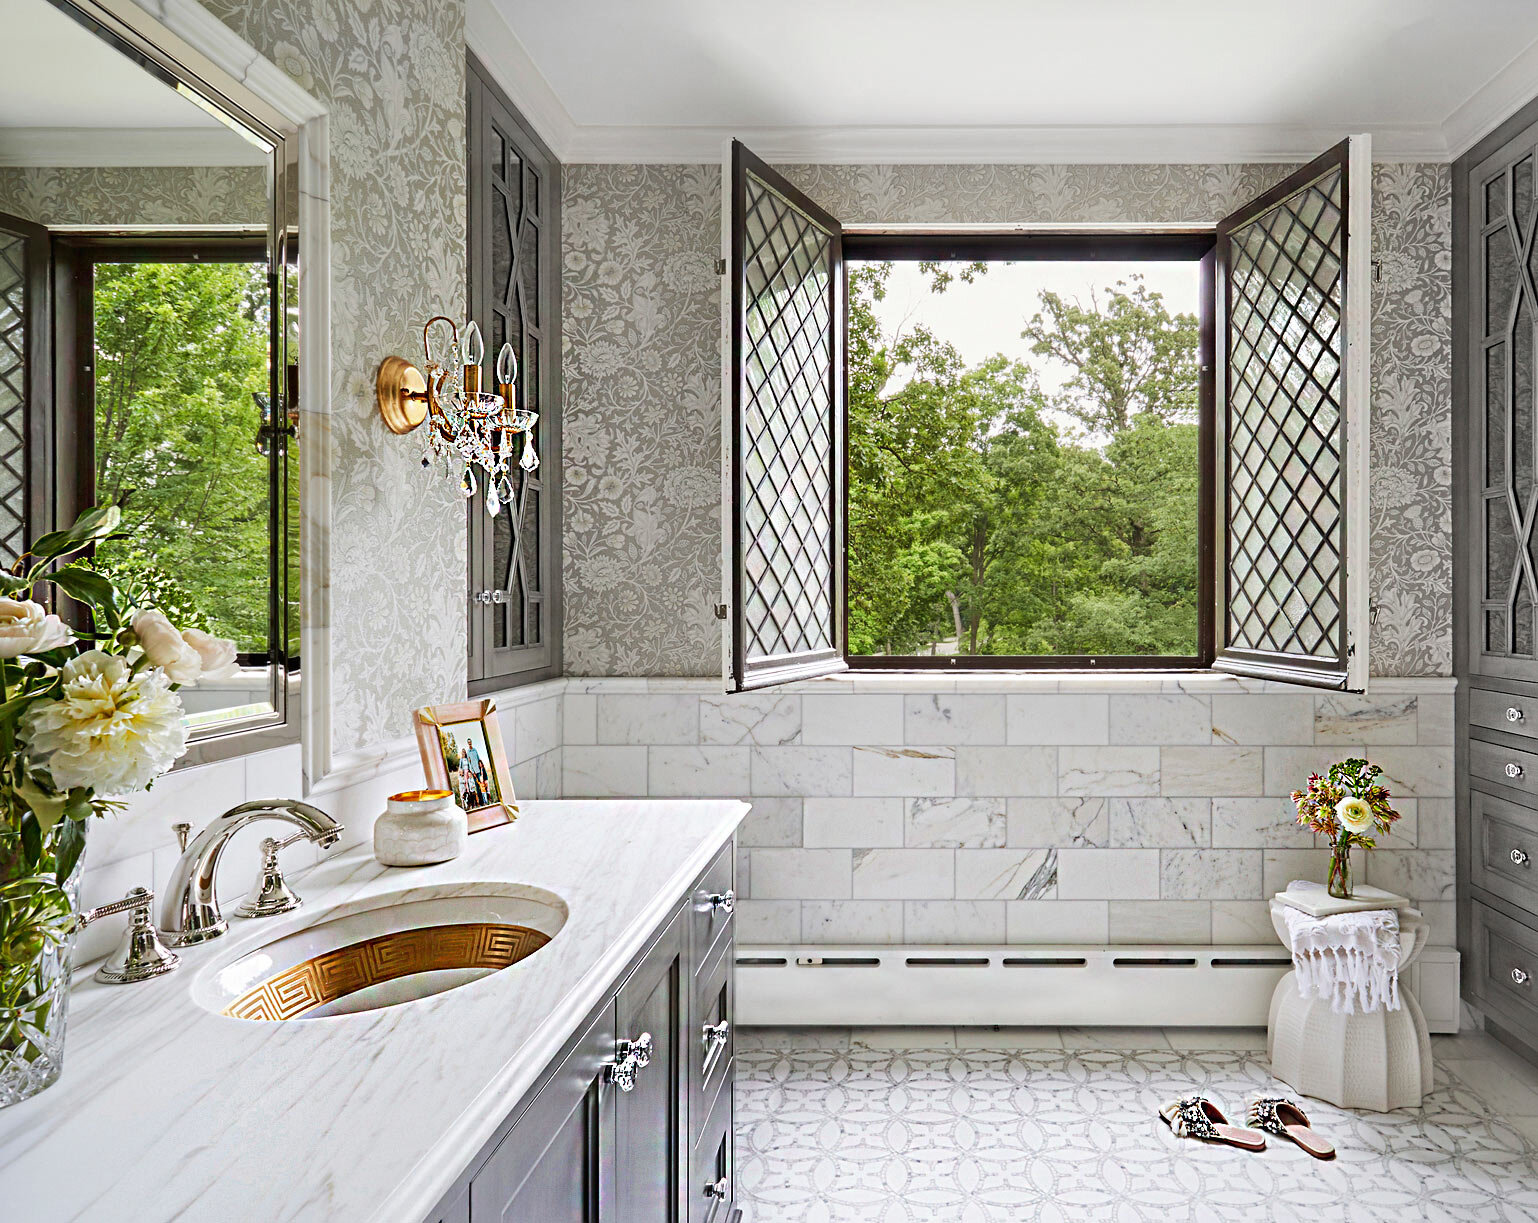 From Ordinary to Sophisticated: Primary Bathroom Improvement Ideas